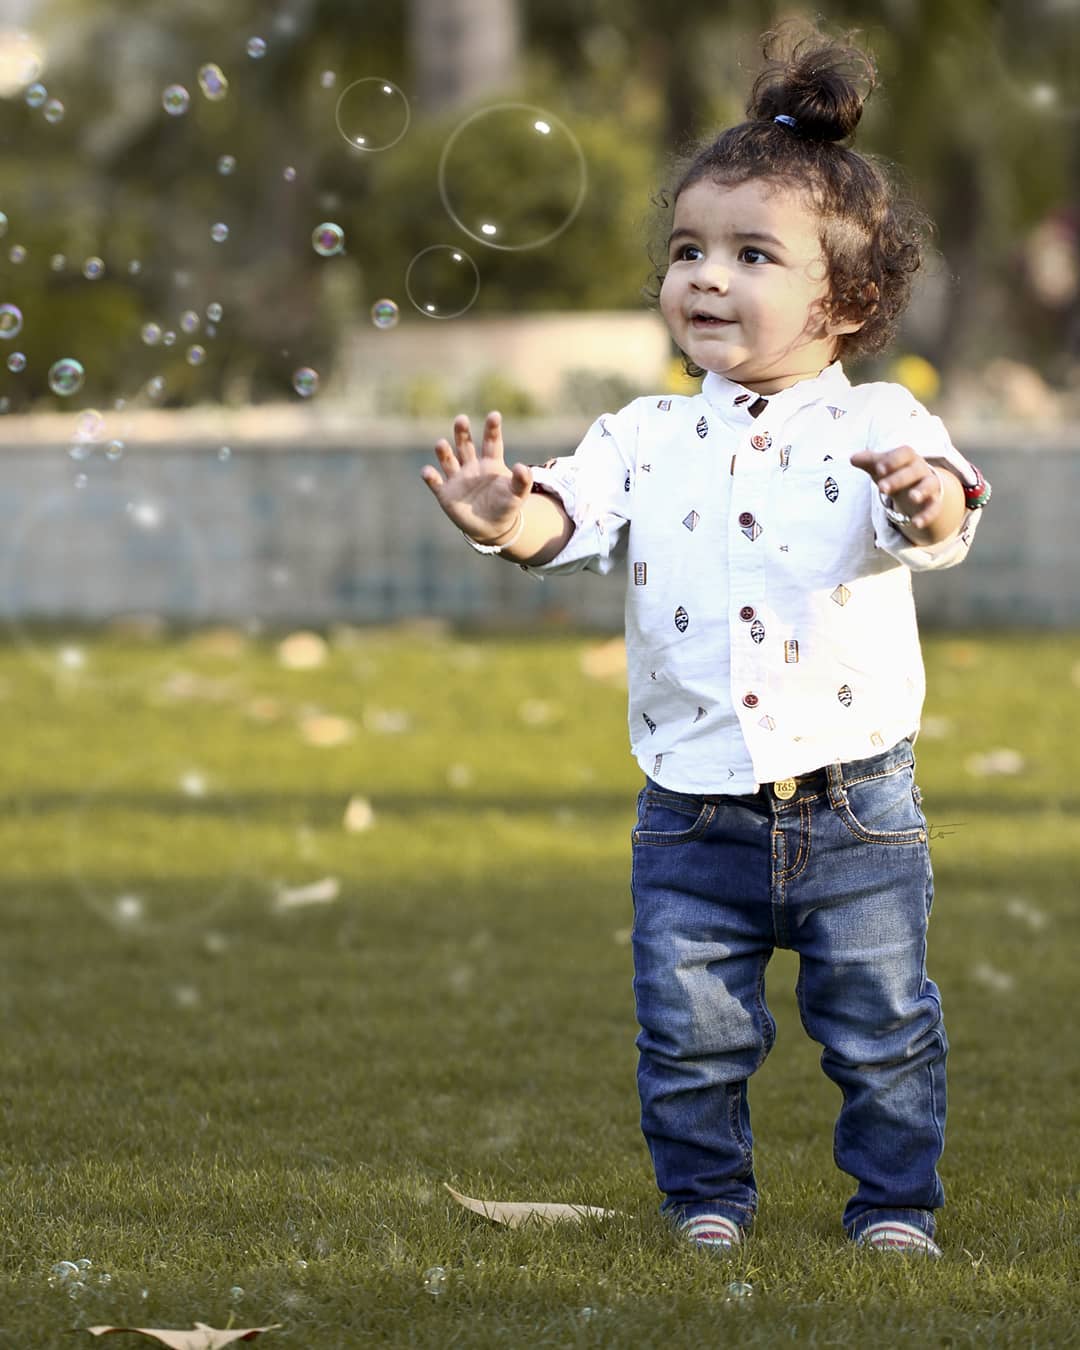 To every child – I dream of a world where you can laugh, dance, sing, learn, live in peace and be happy
😘😘😘😘😘😘😘😘😘😘😇😇😇😇😇😇😇
In Frame : Aarav(cute baby boy),
✨✨✨✨✨✨✨✨✨✨✨✨✨✨✨
📷 Baby & Family Shoot by : Dip thakkar | 
Book your shoot
https://wa.me/919924227745
https://mementophotography.xyz
Instagram
@dip_memento_photography
@dipthakkar.clicker
#kids #photography #ahmedabad
 #dipmementophotography 🙌 #kidsphotography #parenting #motherhood #baby #babie#little  #instababy #babys #babycute  #beautifulbaby #cutie #berrycurly #birth #beauty #babybump #mommylife #momlife #mommy #kids #babyfever #babiesofahmedabad